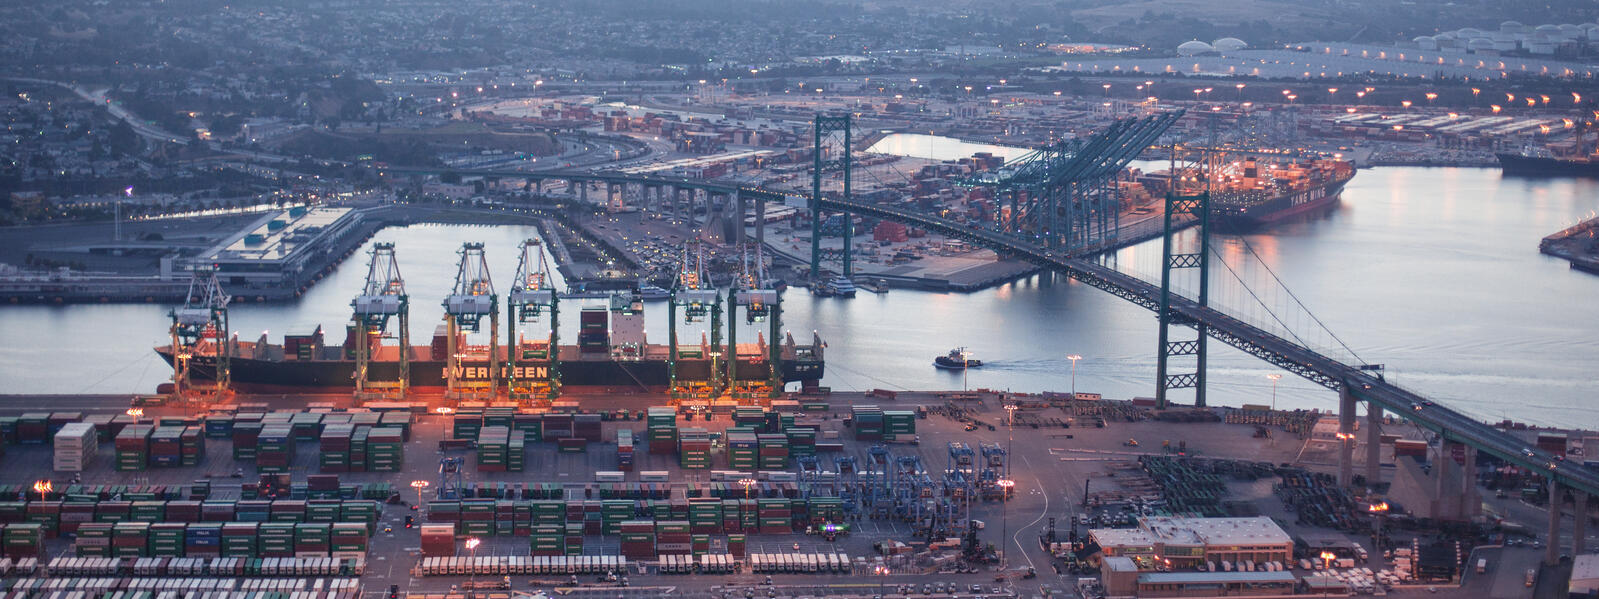 Shipping port from above